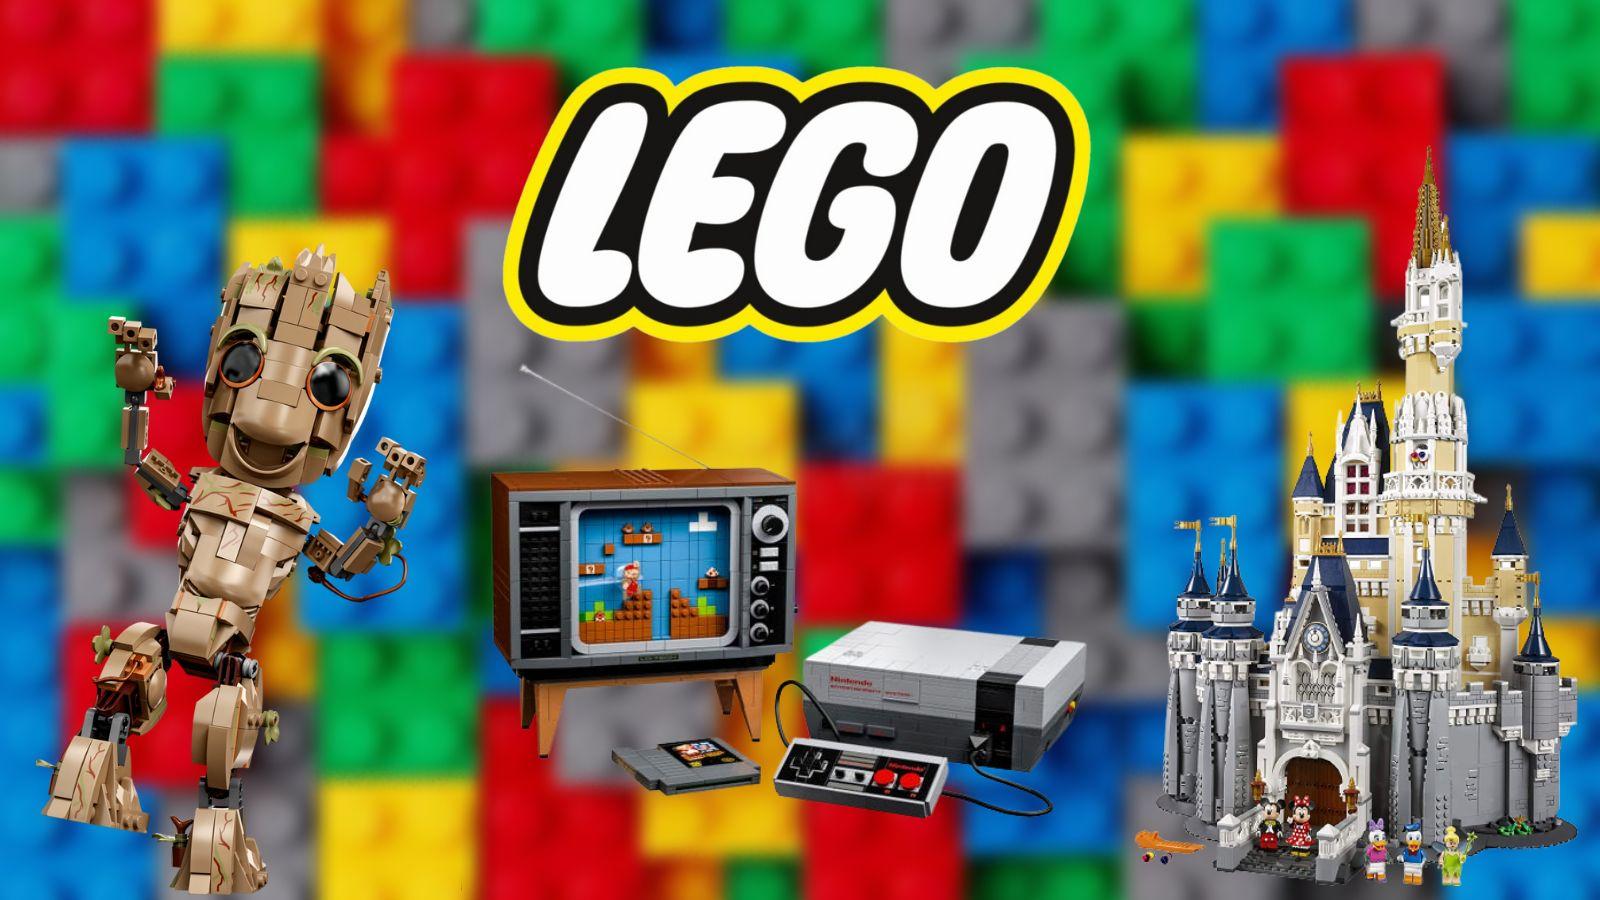 LEGO - If you have a budding LEGO designer in the family, then you